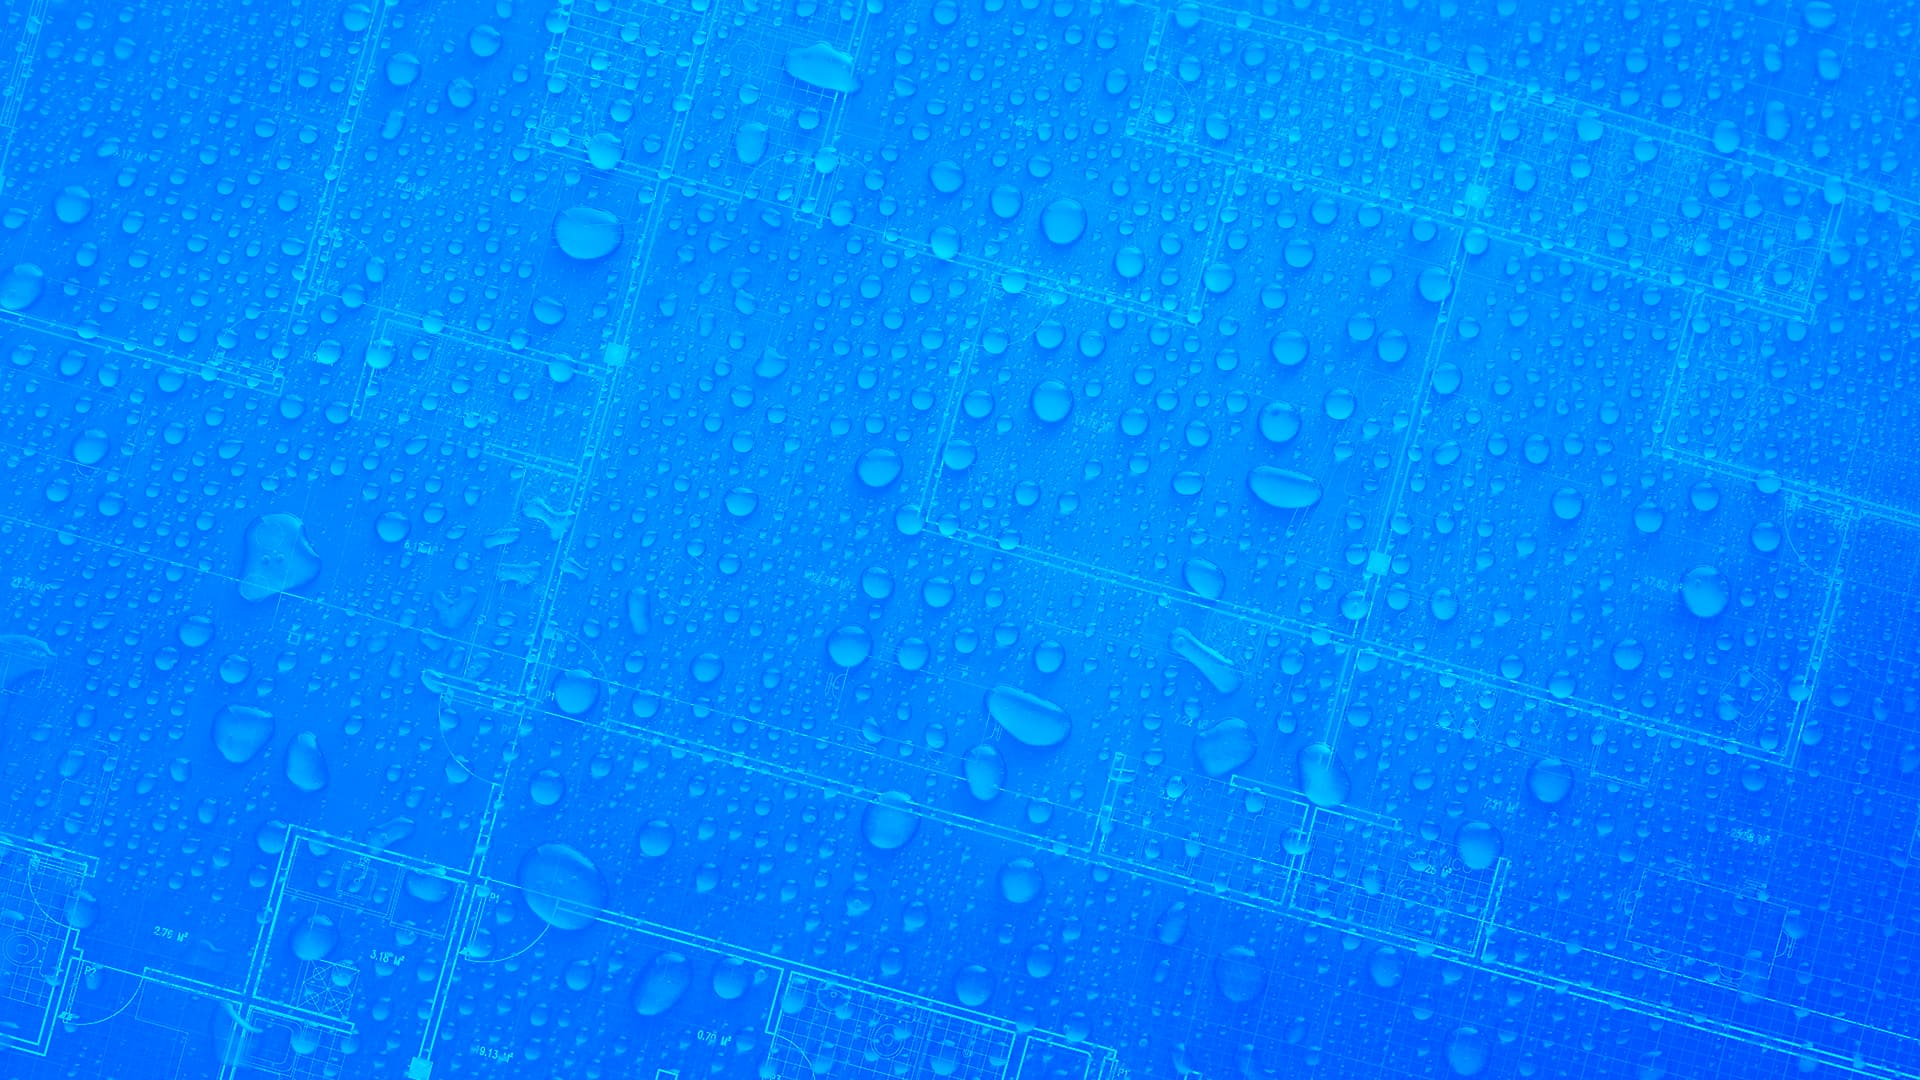 Water Drops on a Blueprint Surface